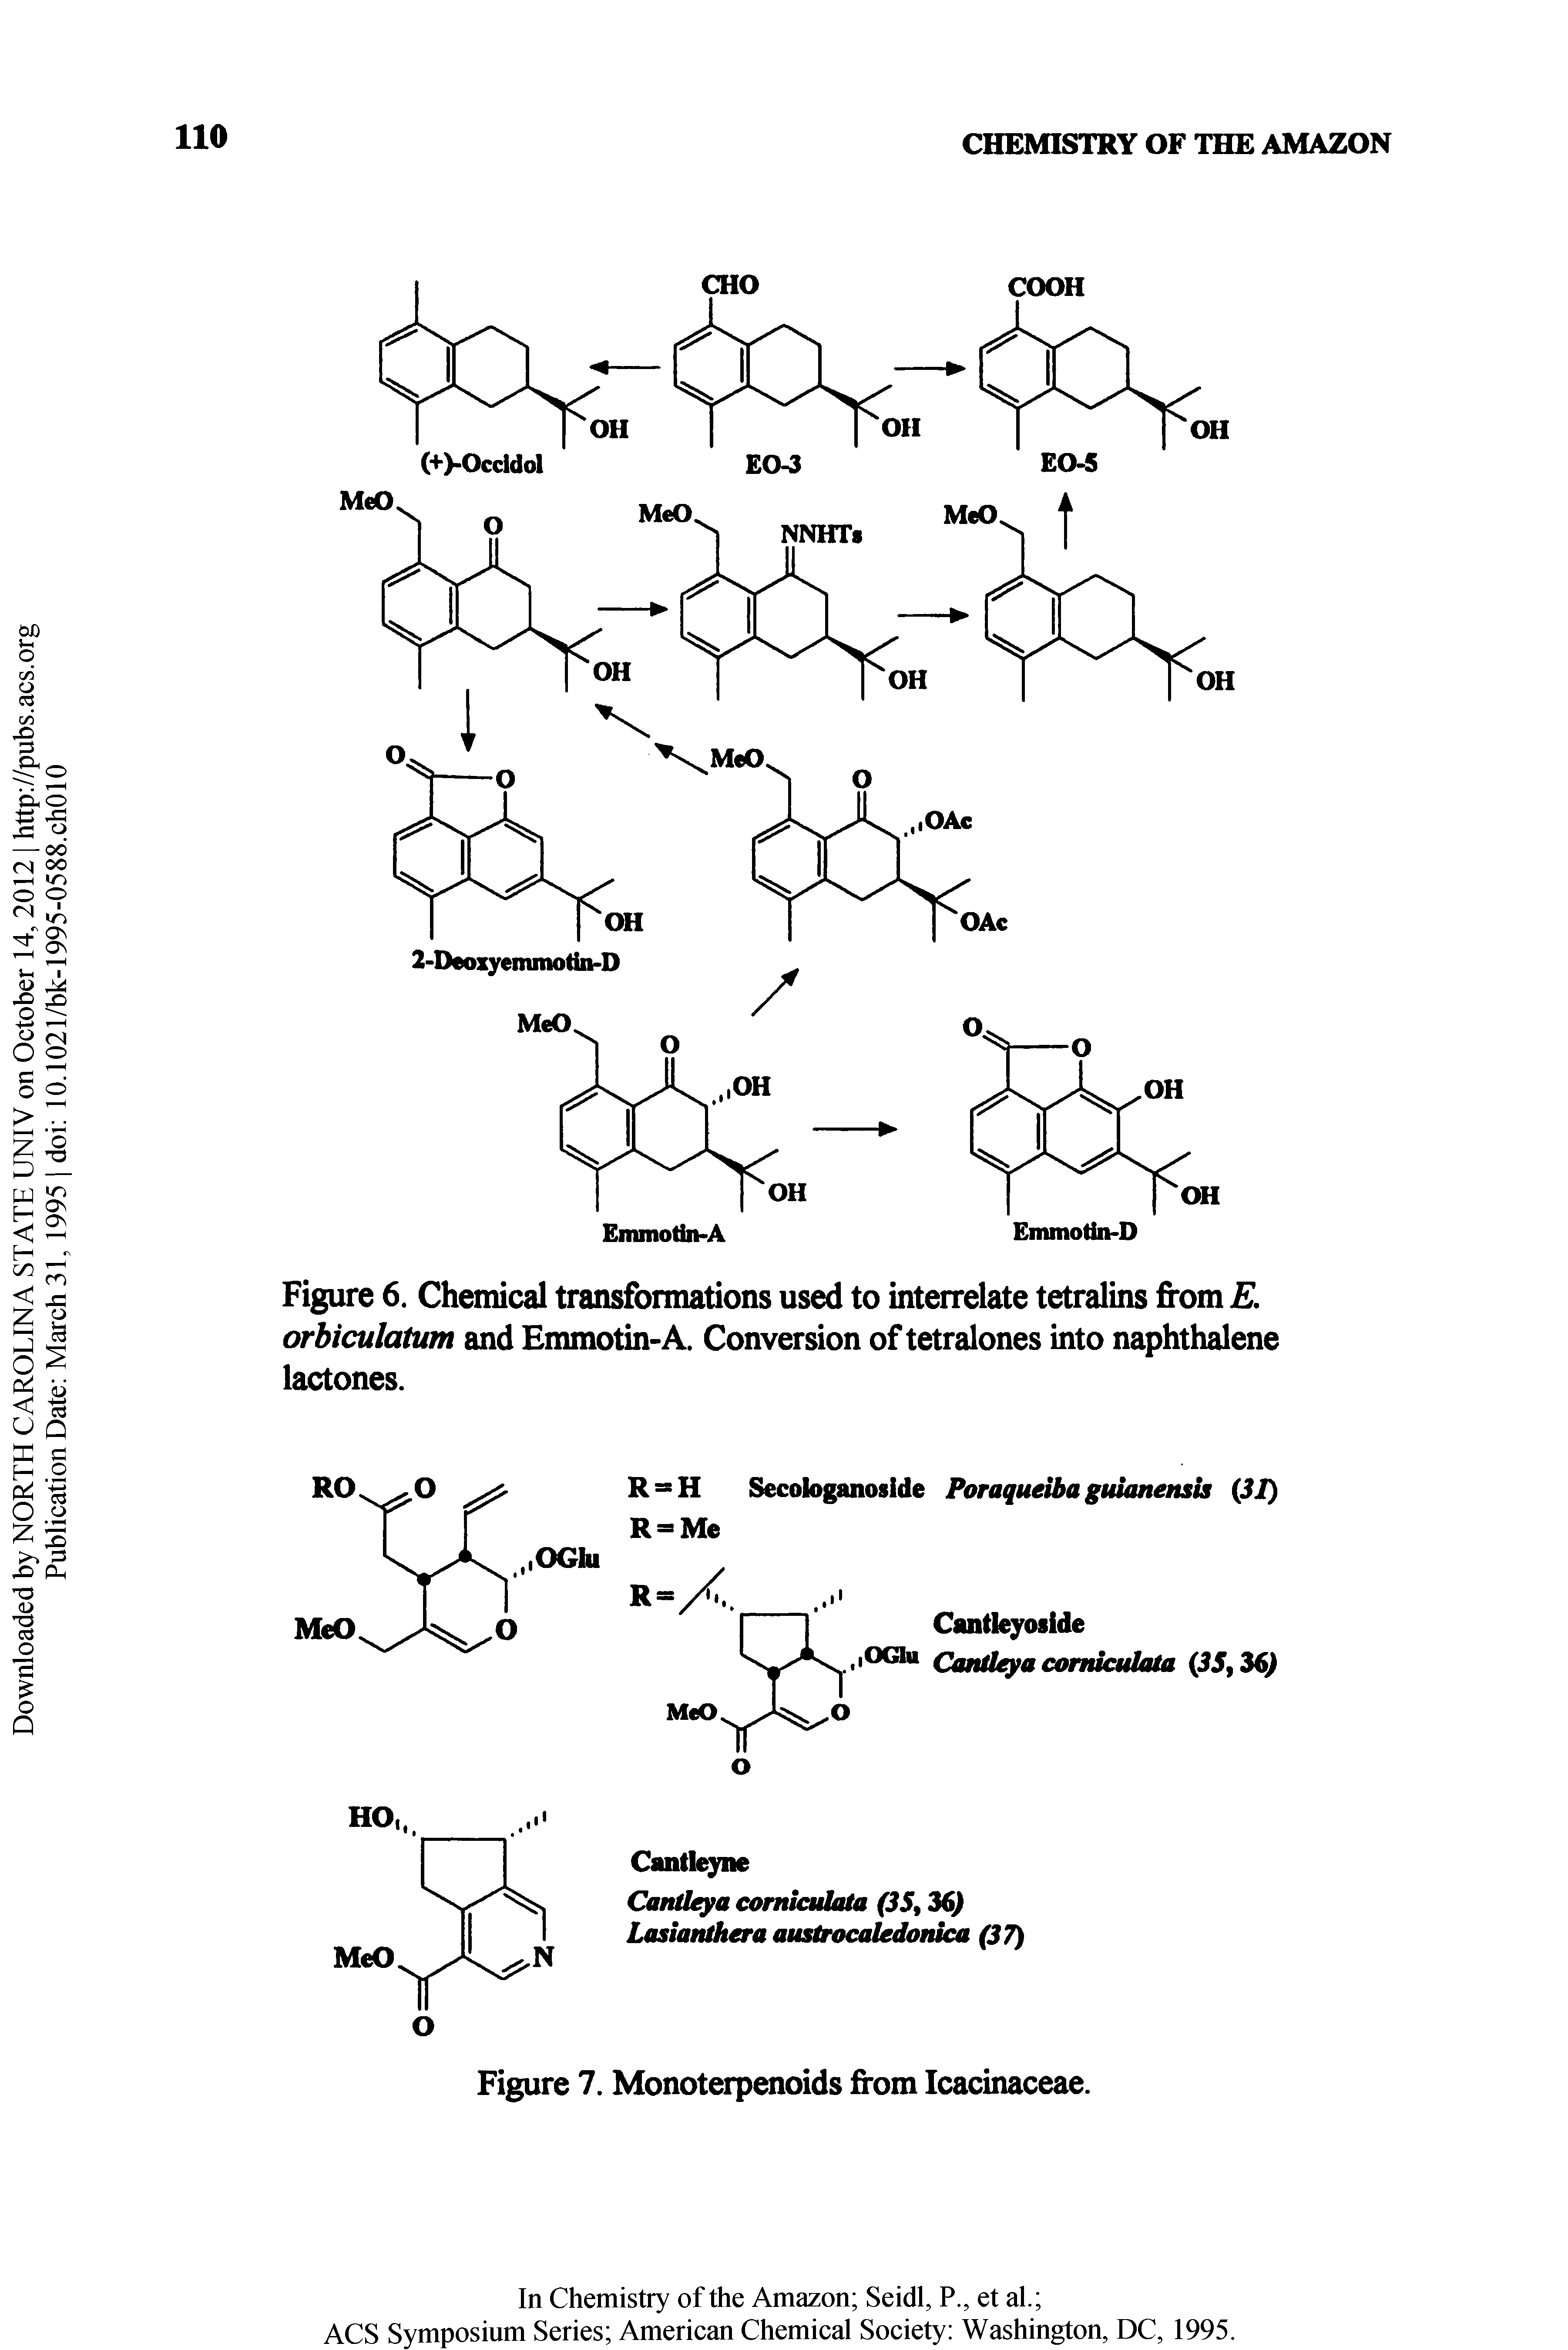 Figure 6. Chemical transformations used to interrelate tetralins from E, orbiculatum and Emmotin-A. Conversion of tetralones into naphthalene lactones.